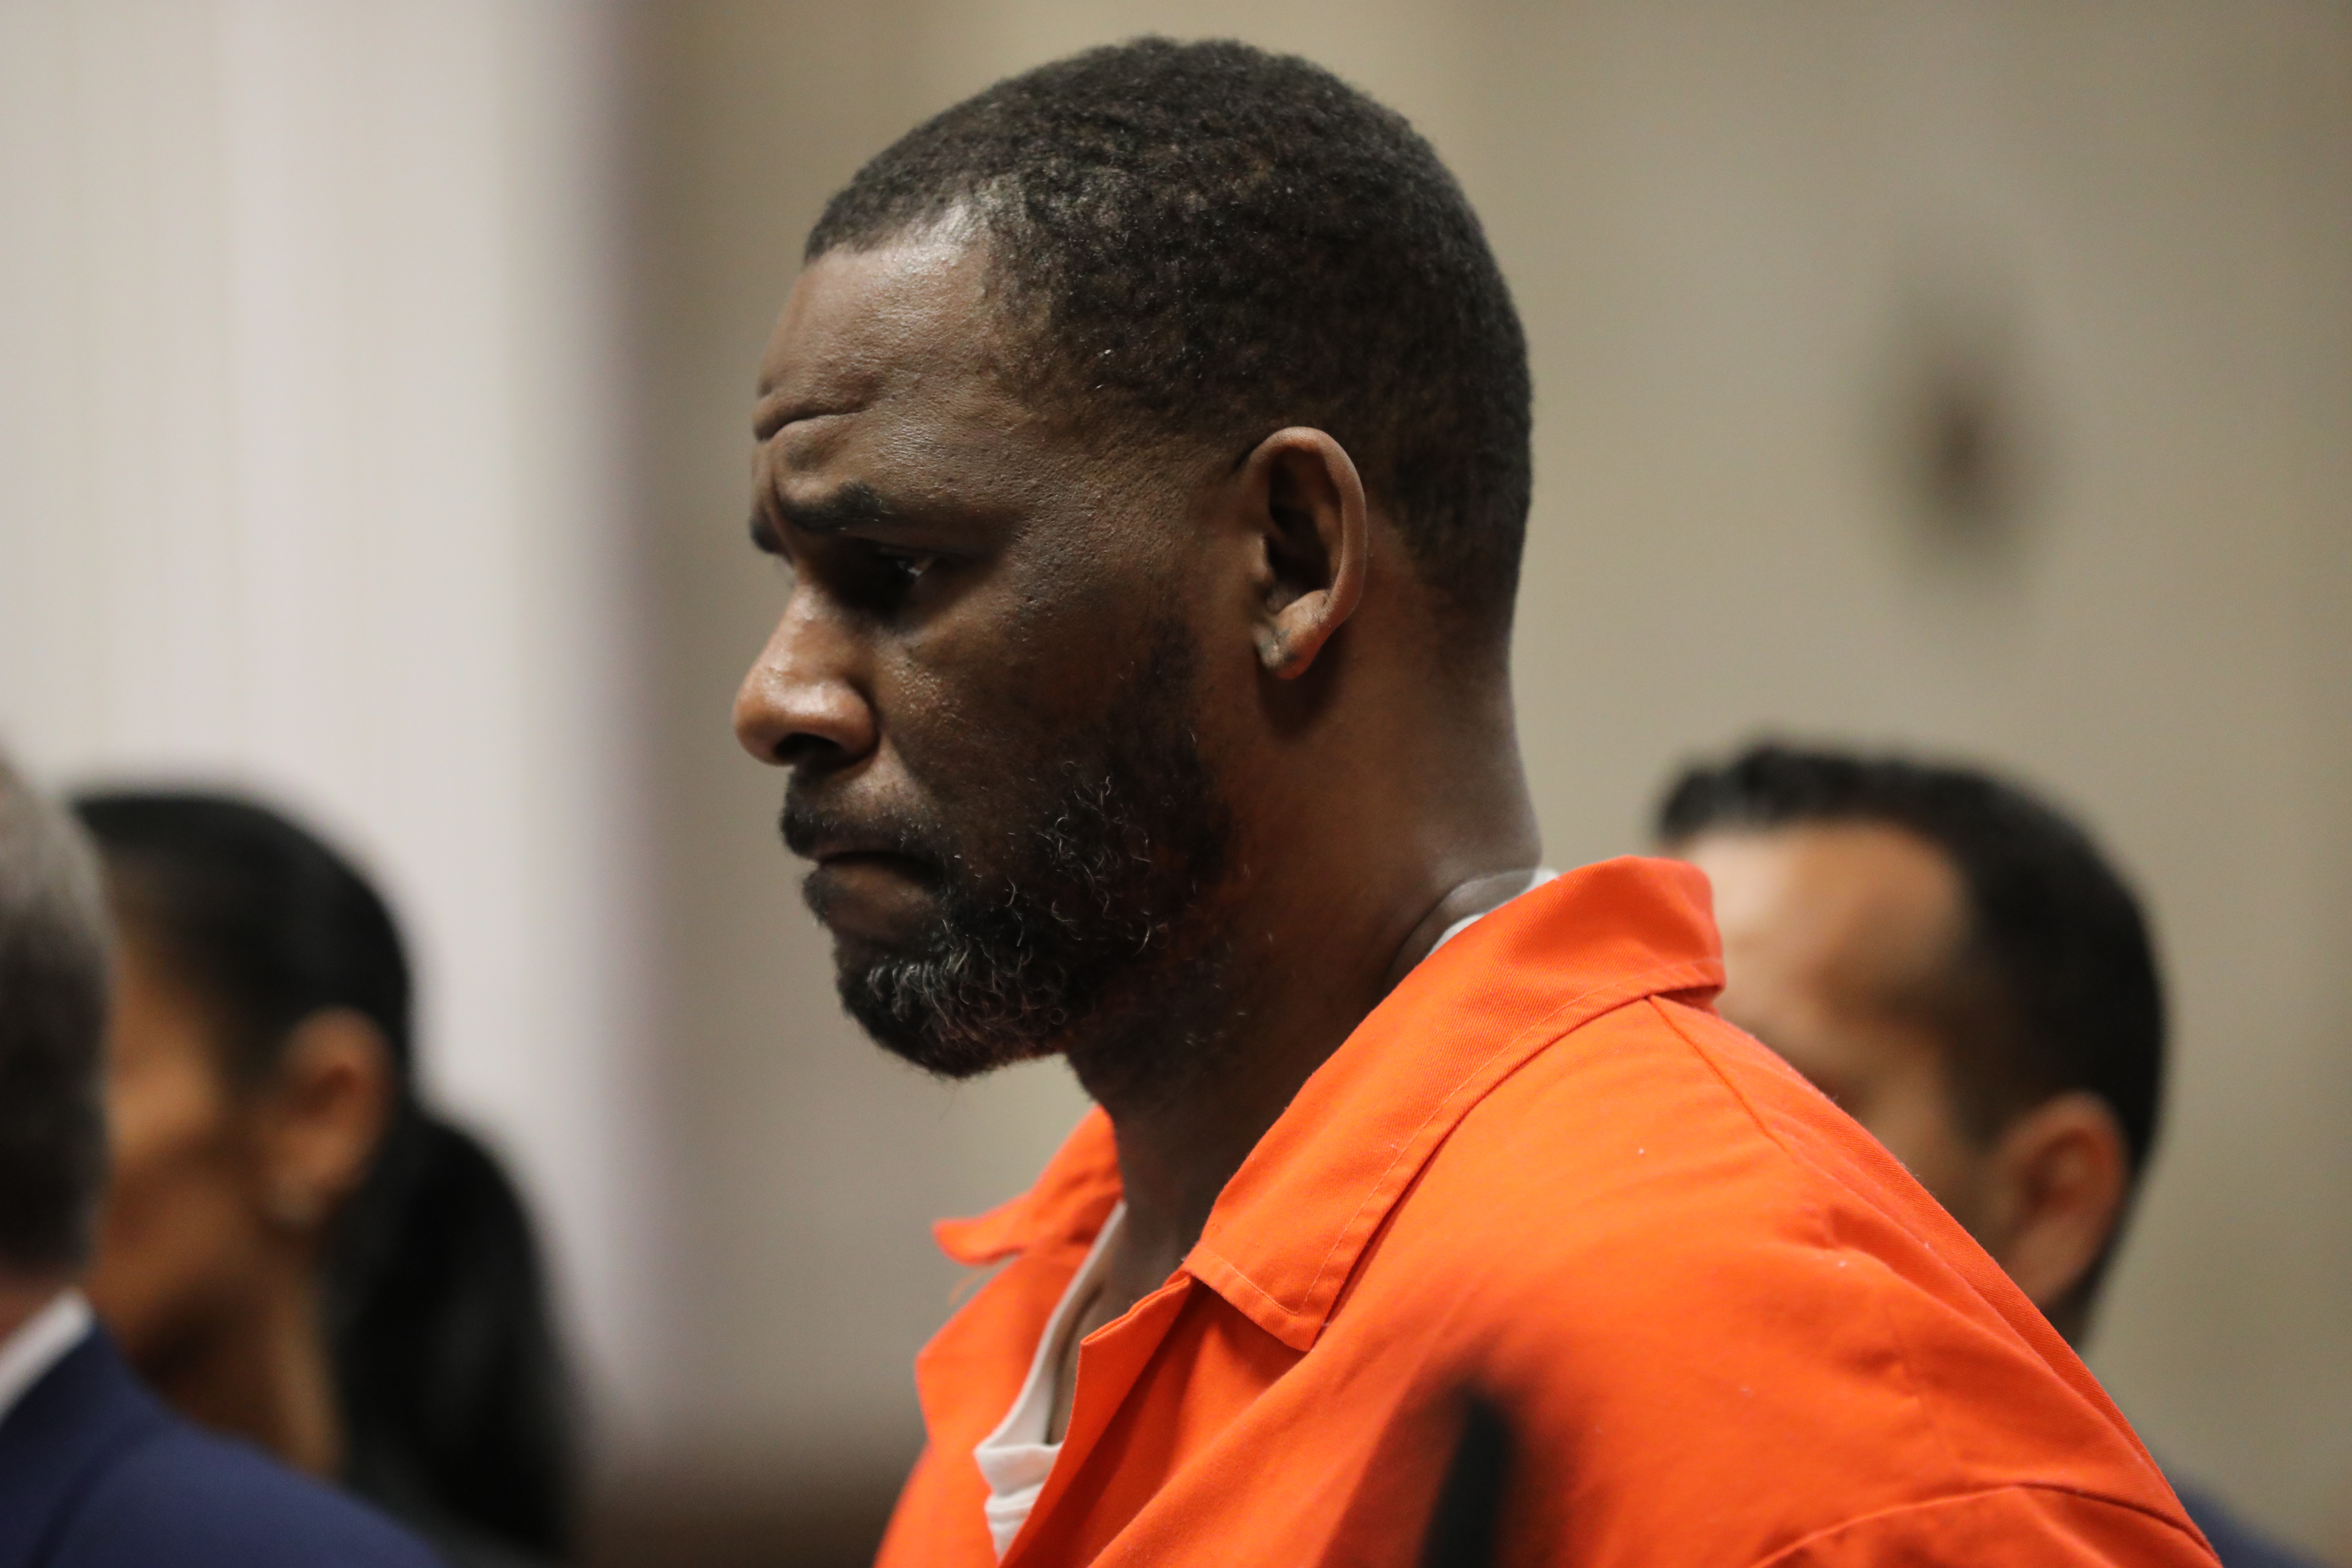 The judge declined to return the $100,000 bail money that Valencia Love used back in February to help R. Kelly get out of jail.